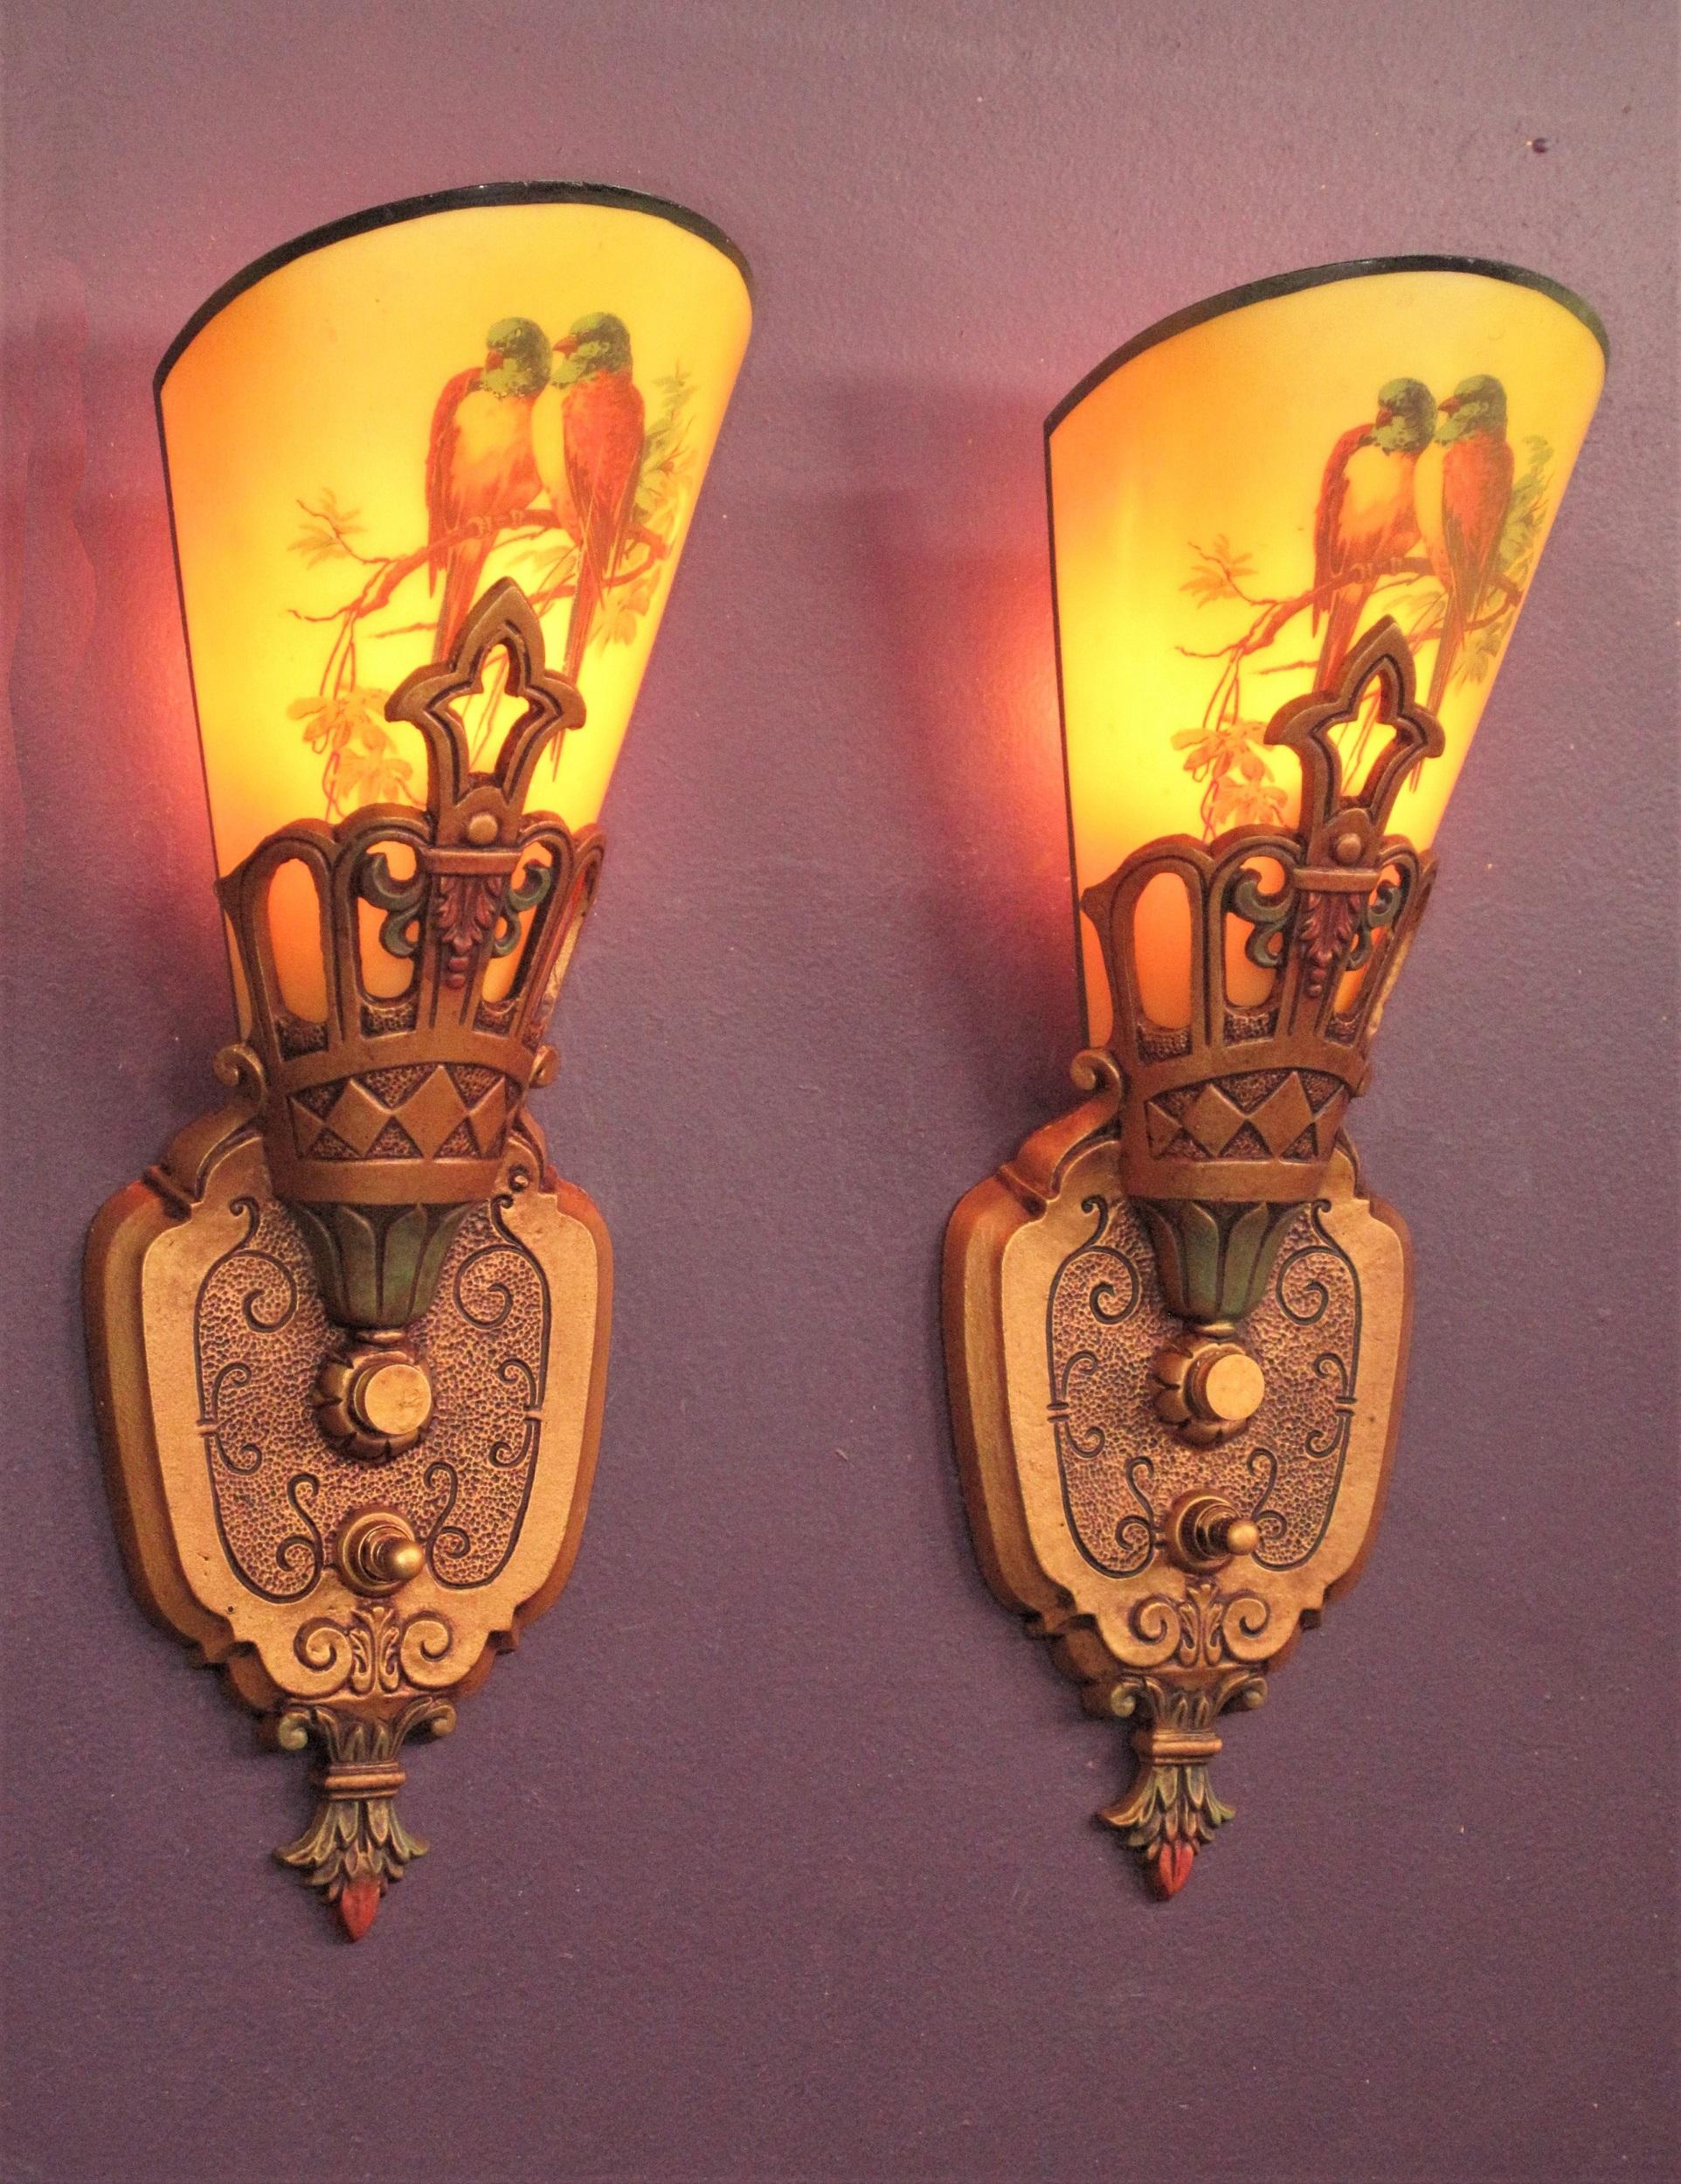 American SINGLE ONLY - Not a pair. Vintage Parrot Slip Shade Sconce, Late 1920s For Sale